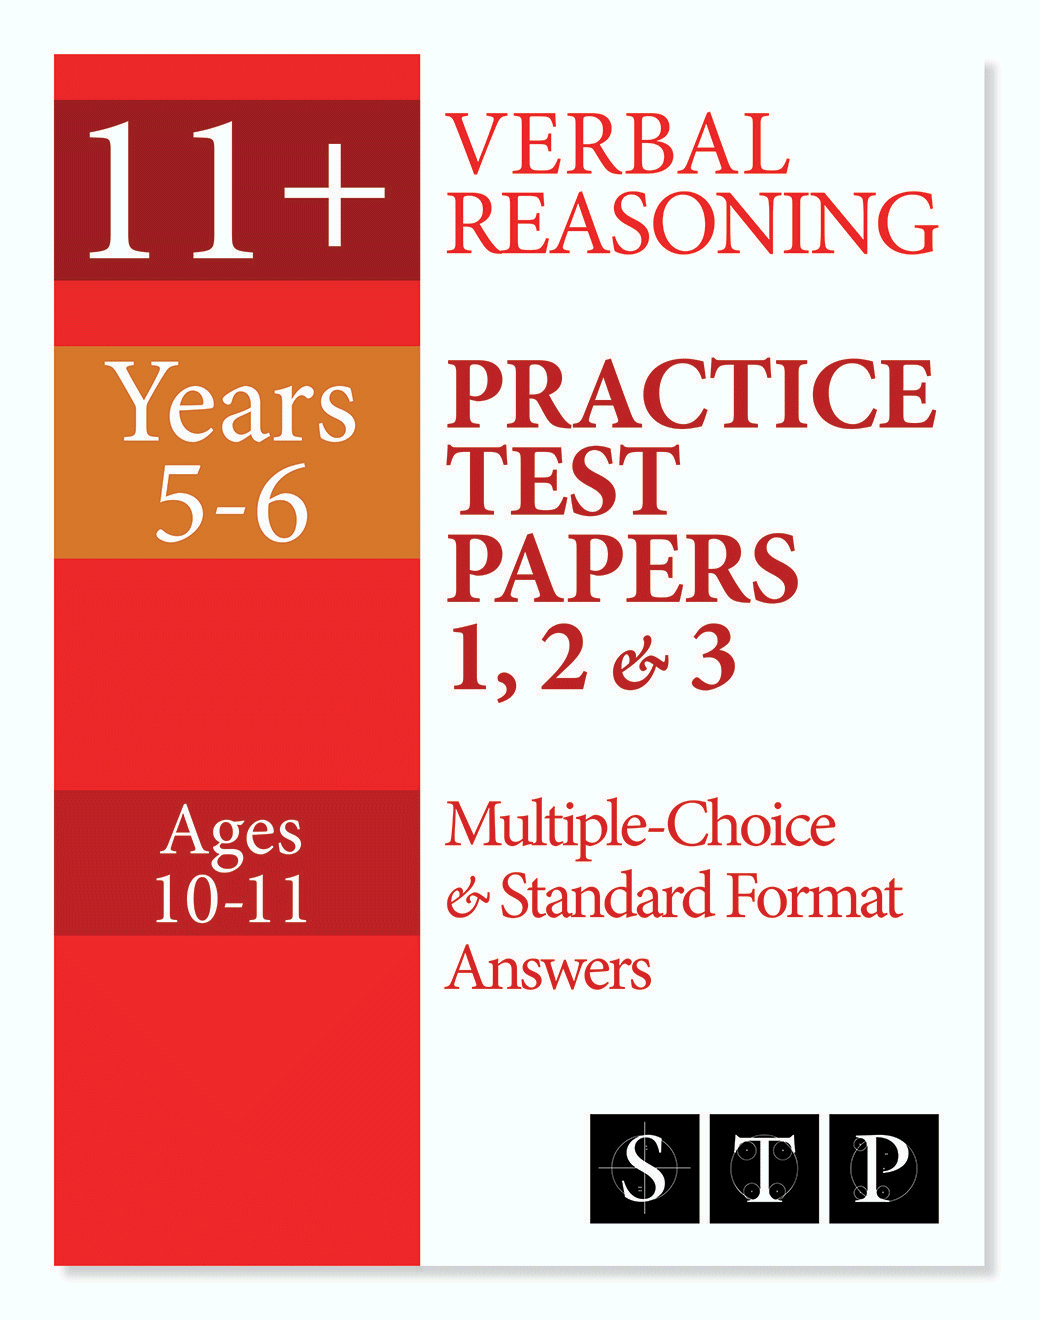 11+ Verbal Reasoning Practice Test Papers 1, 2 & 3. Click here to see inside!